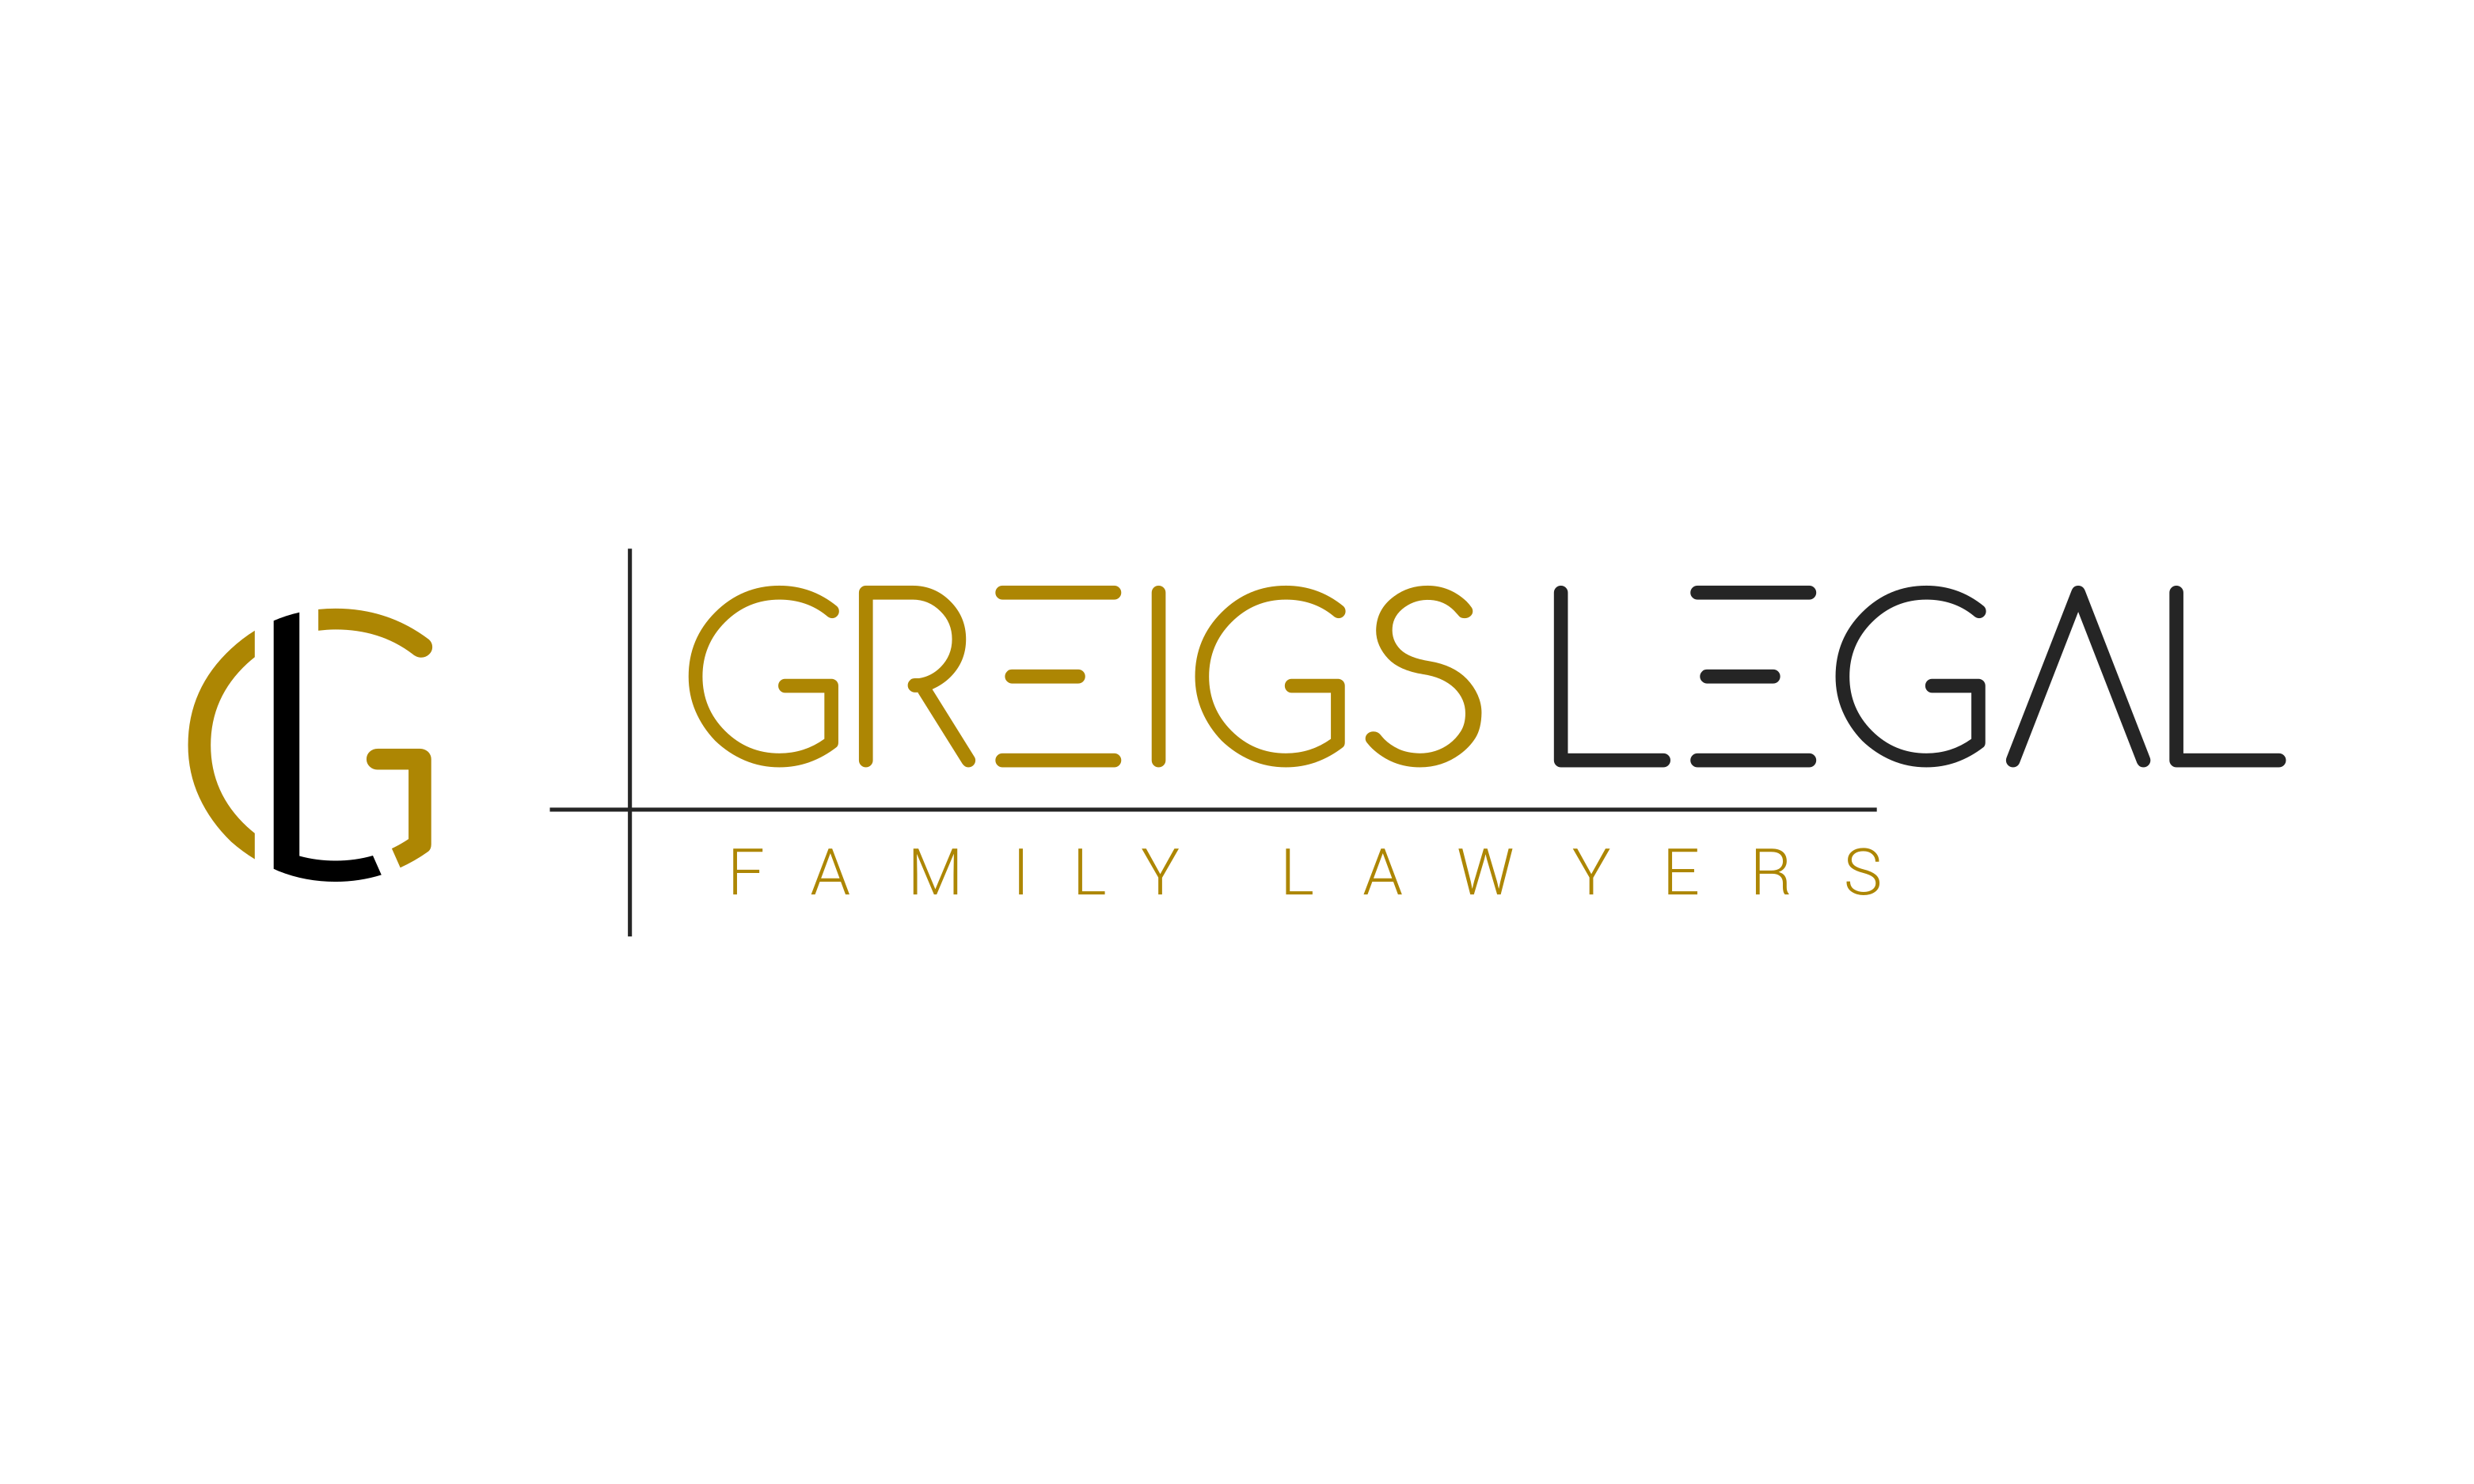 Greigs Legal Family Lawyers